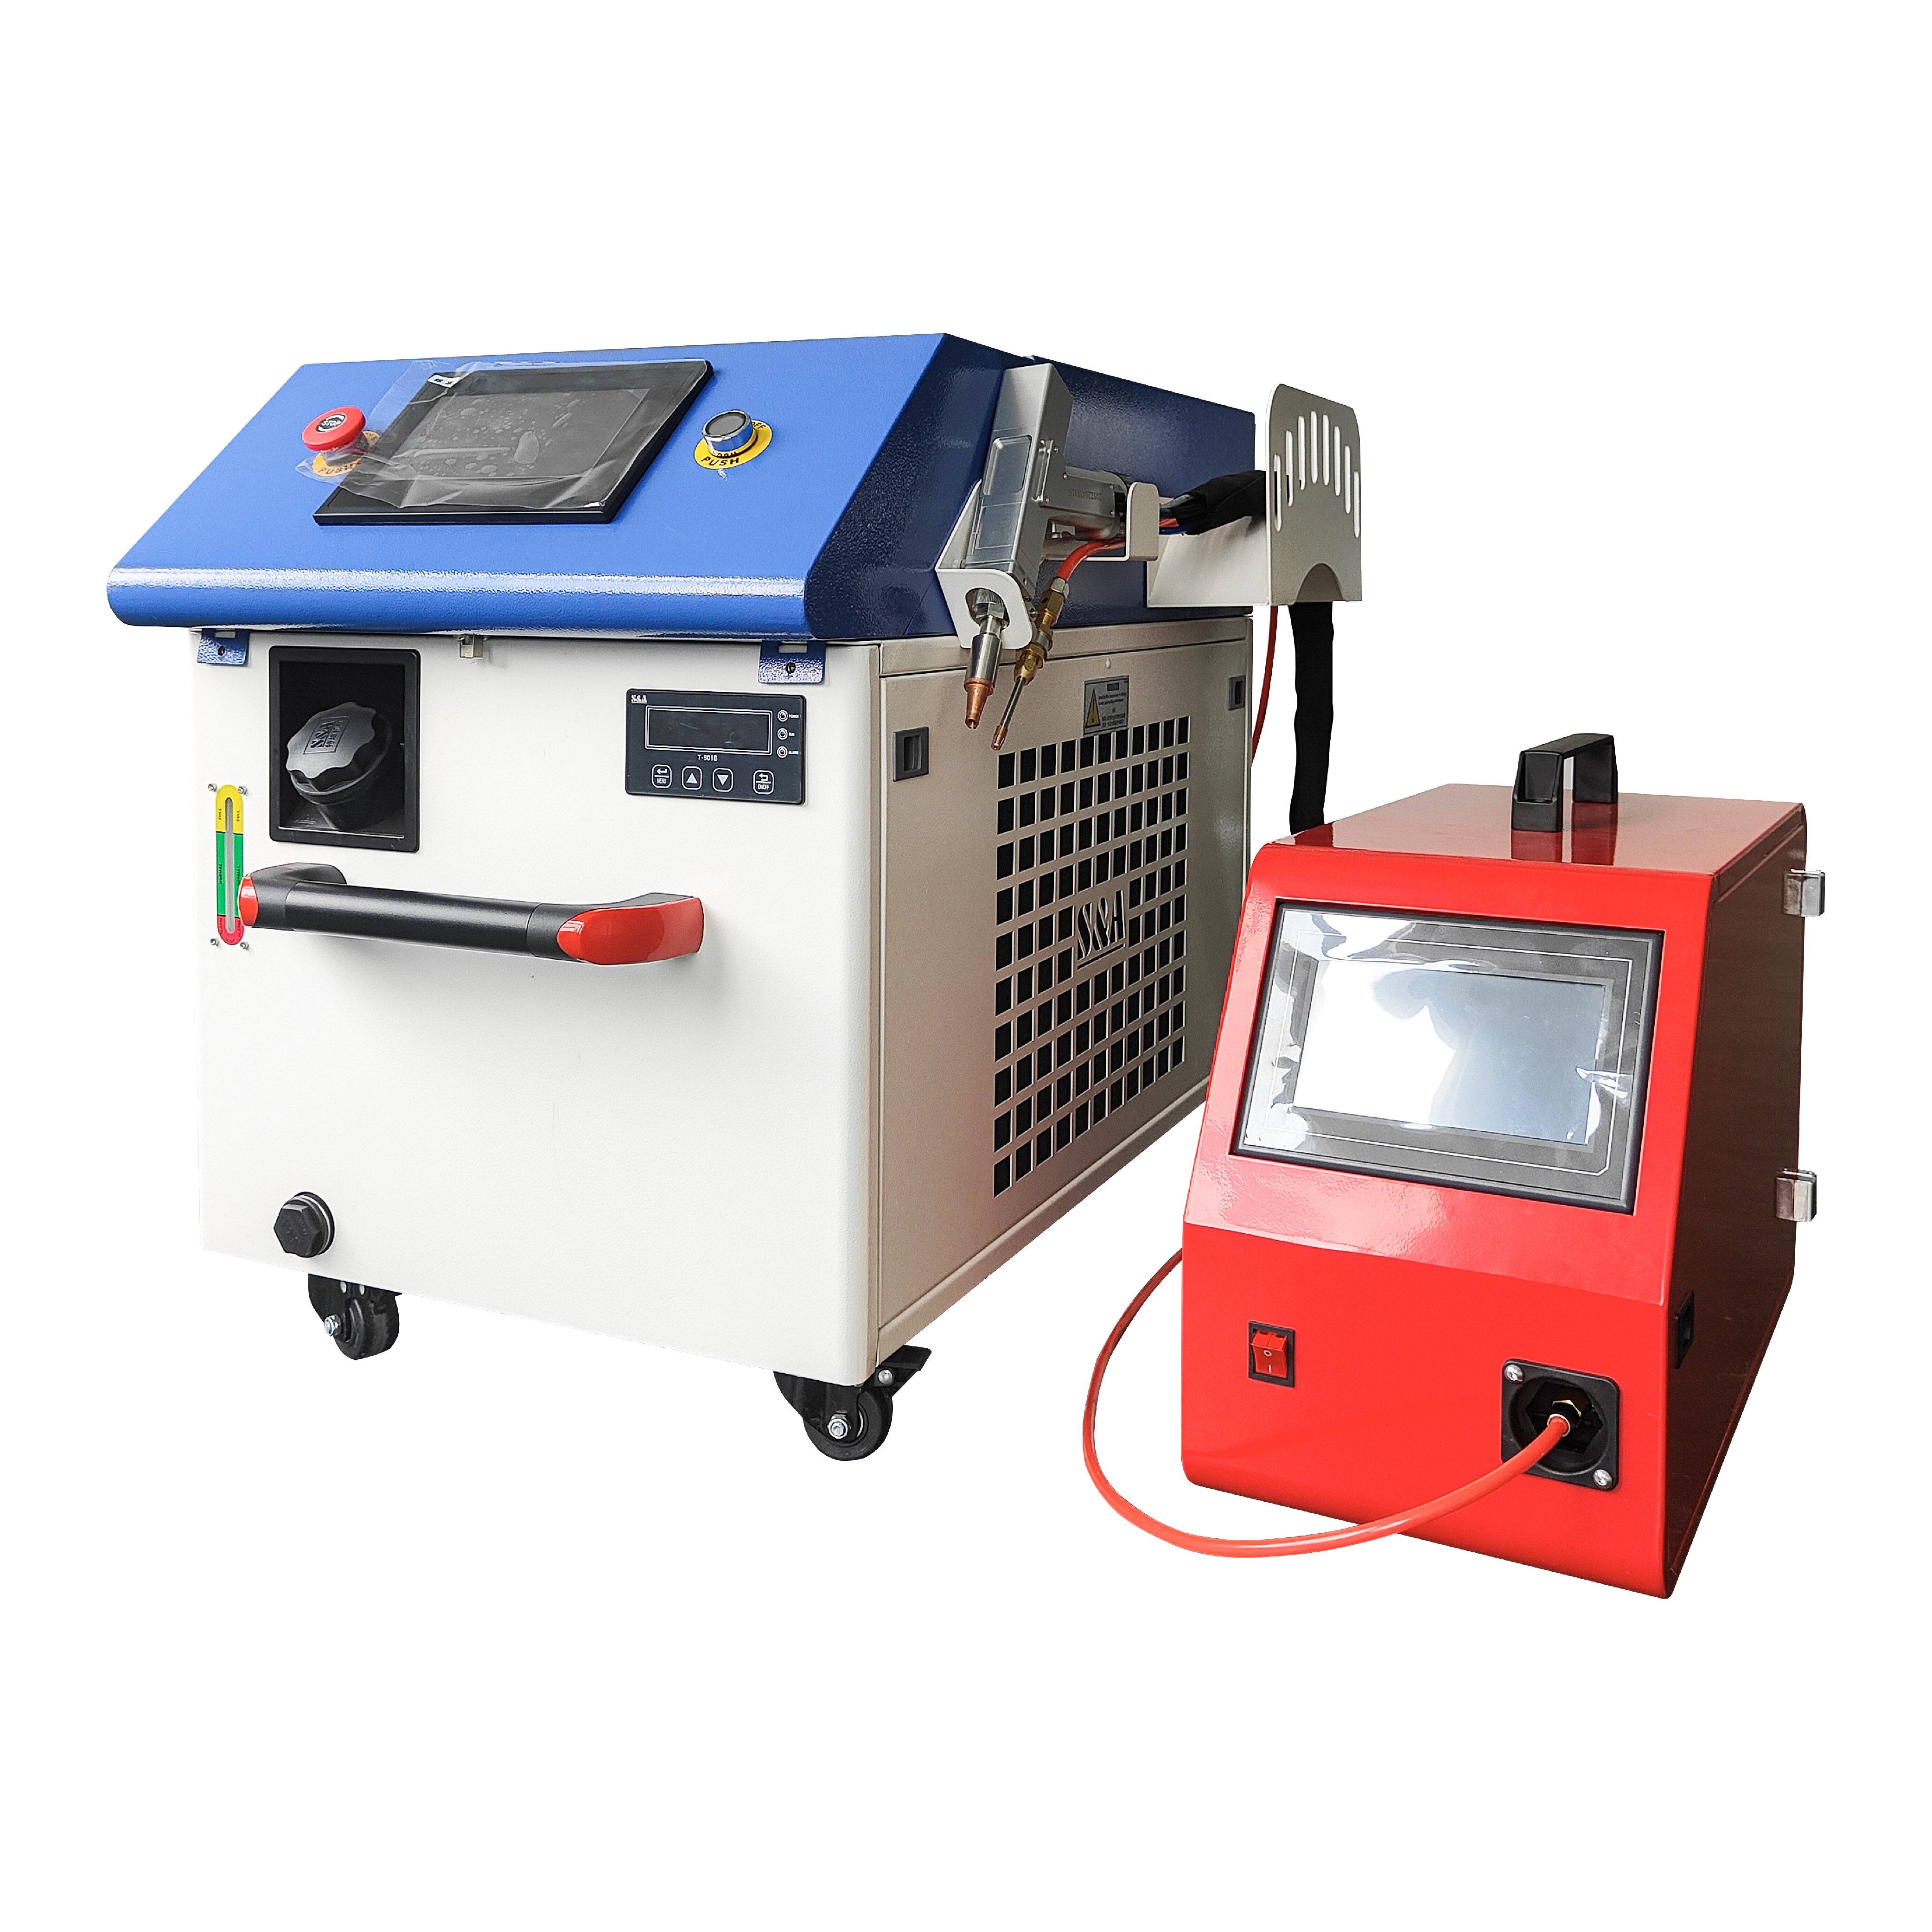 Quality 3 in 1 Aluminium stainless laser welding cutting and cleaning machine 